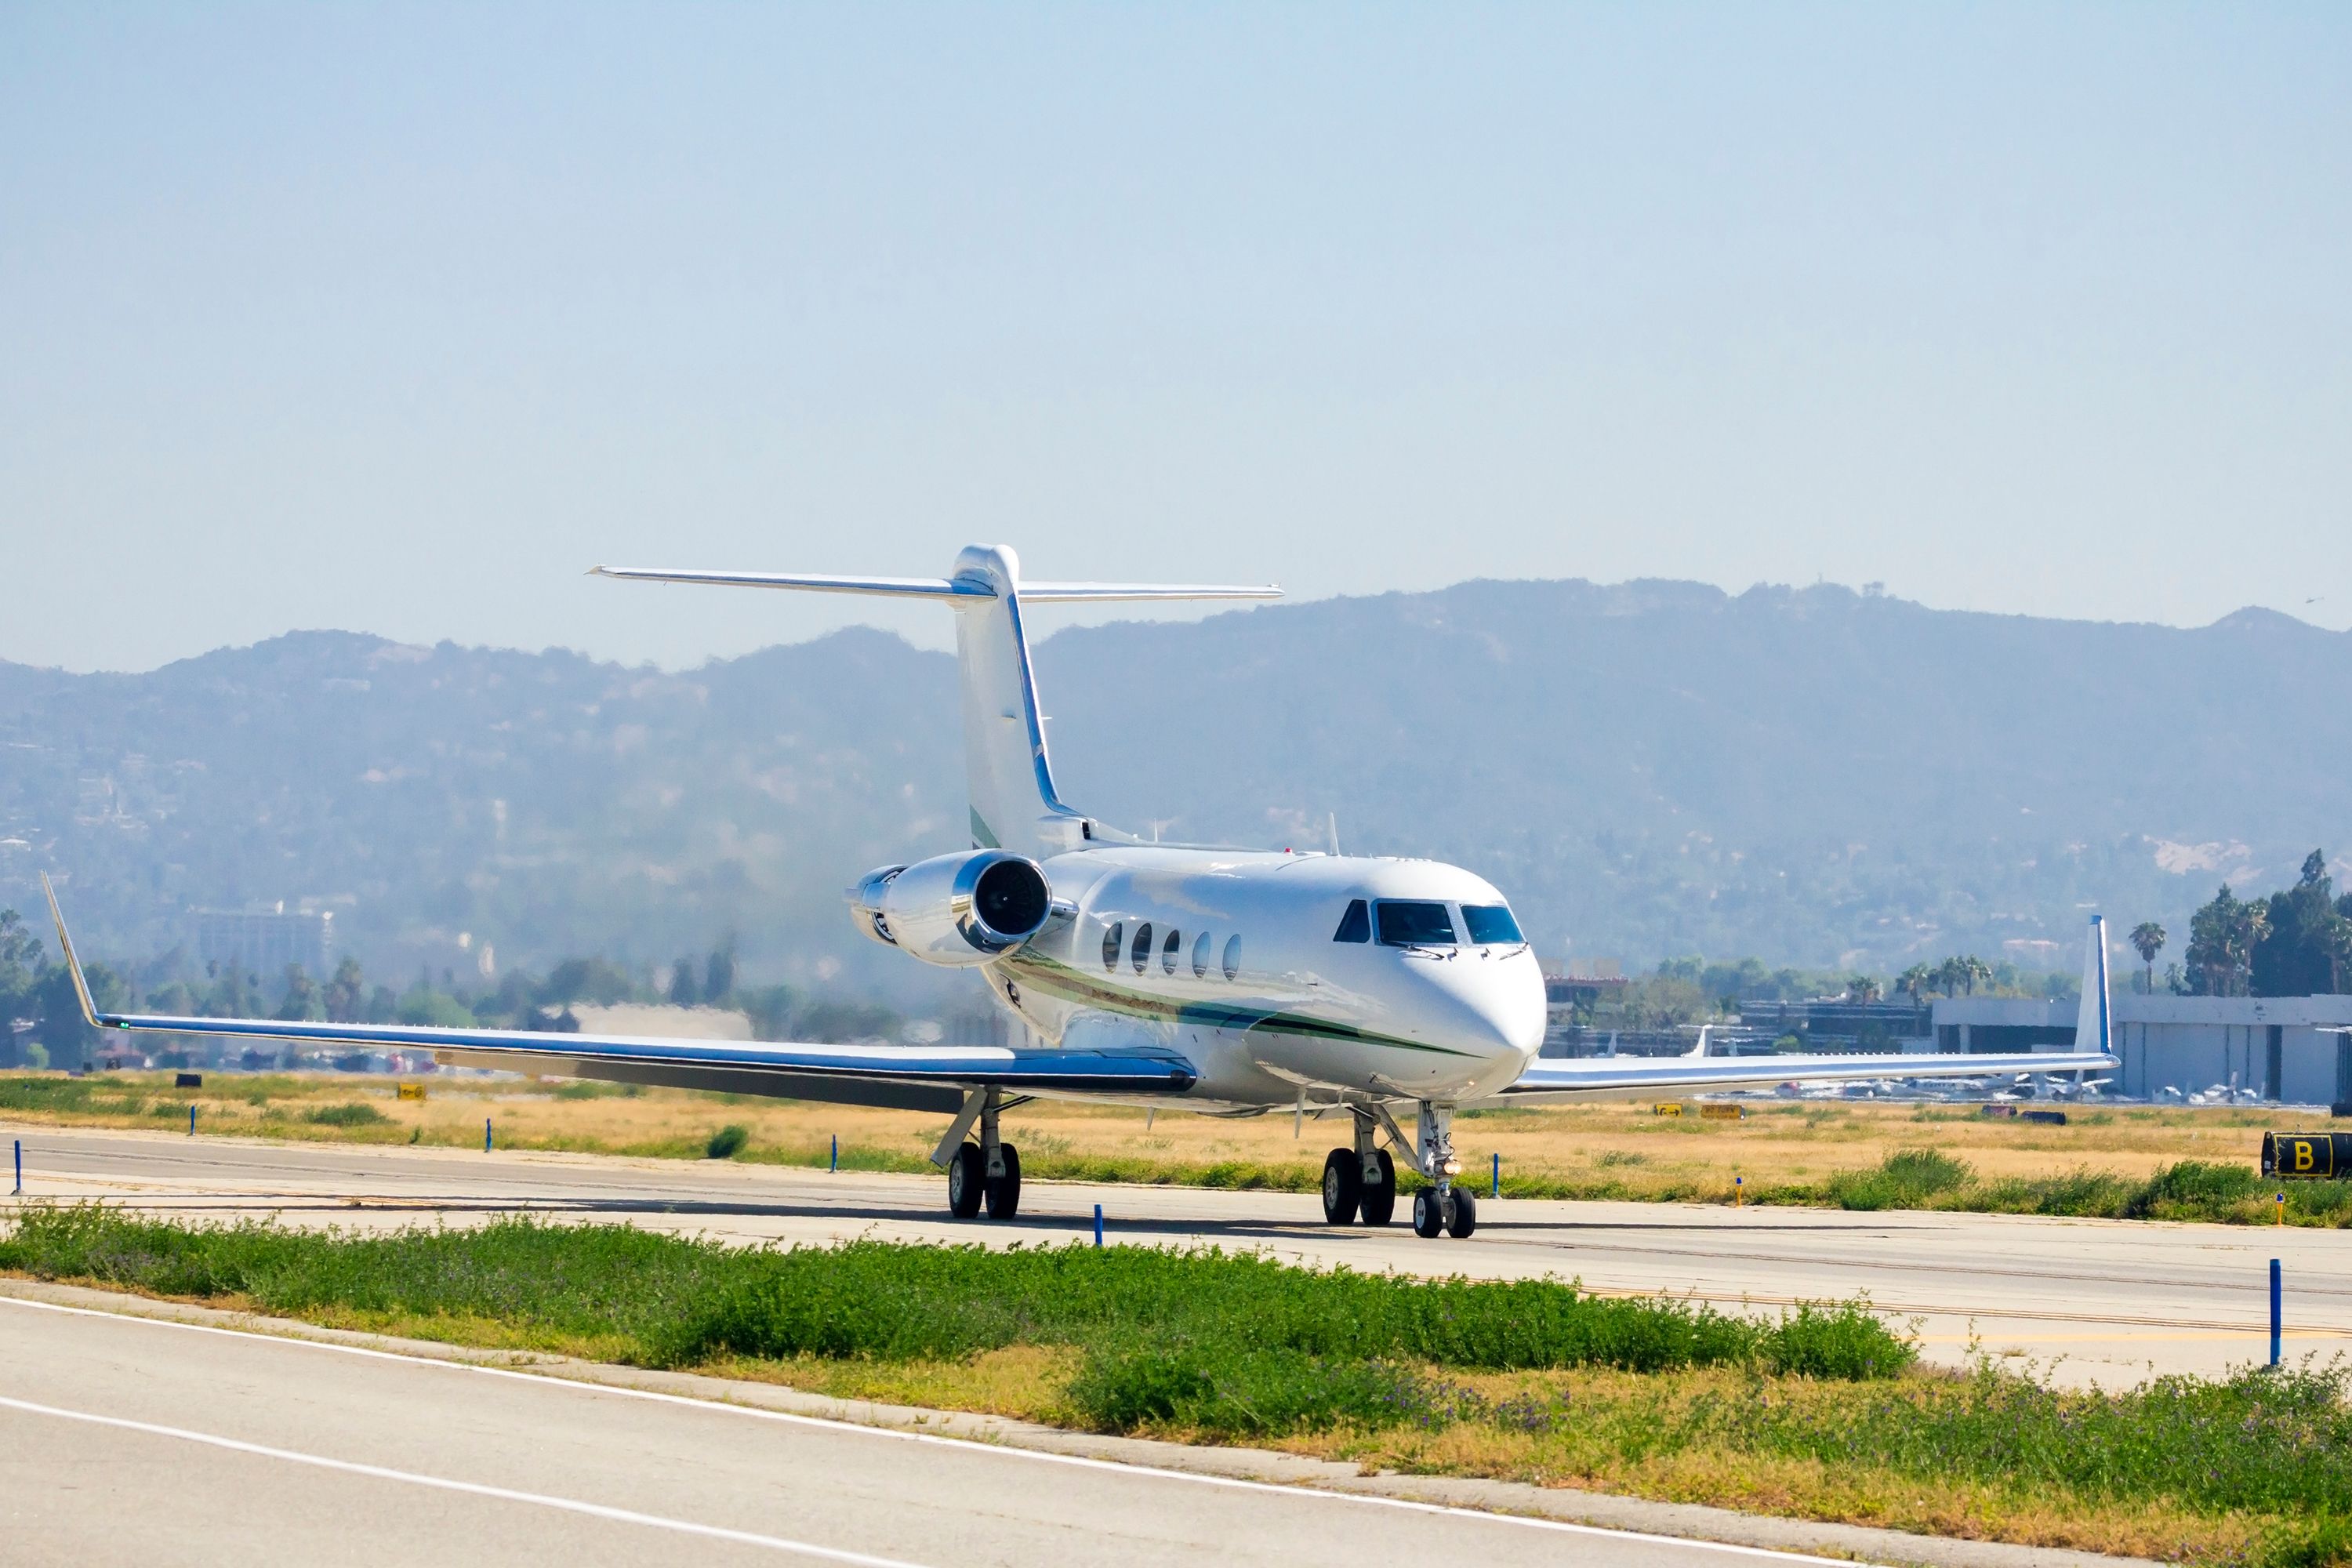 Gulfstream Business Jet Taxiing For Take Off In Van Nuys Airport, California